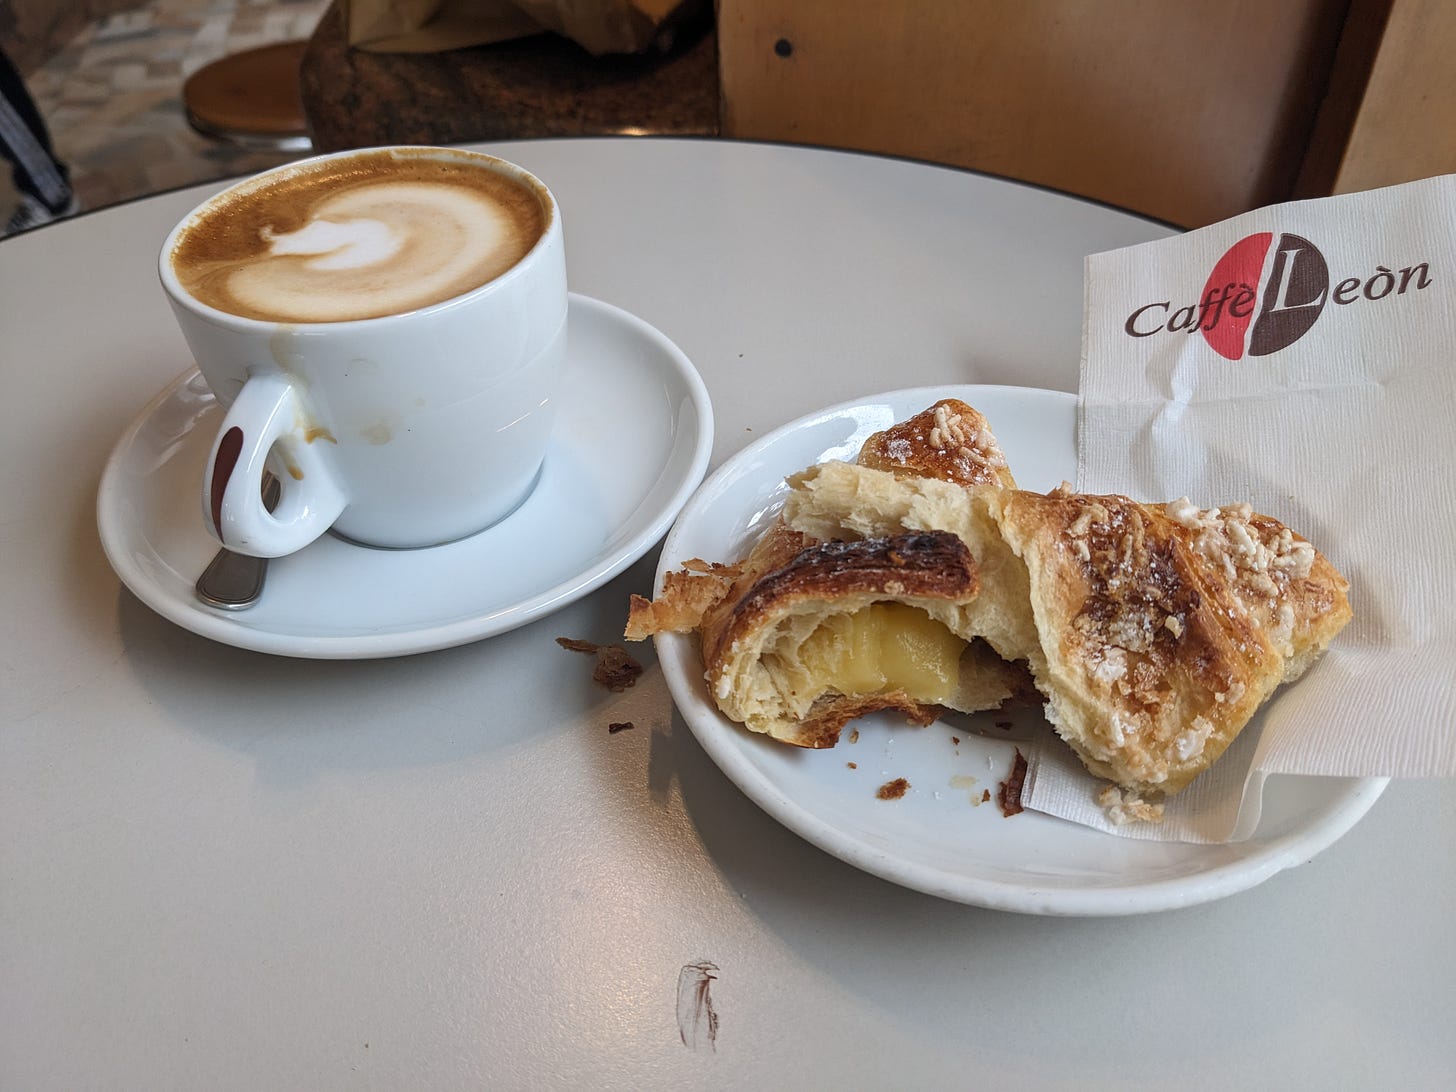 On a table sits a cup of coffee in a white cup, and a pastry which has been torn in half